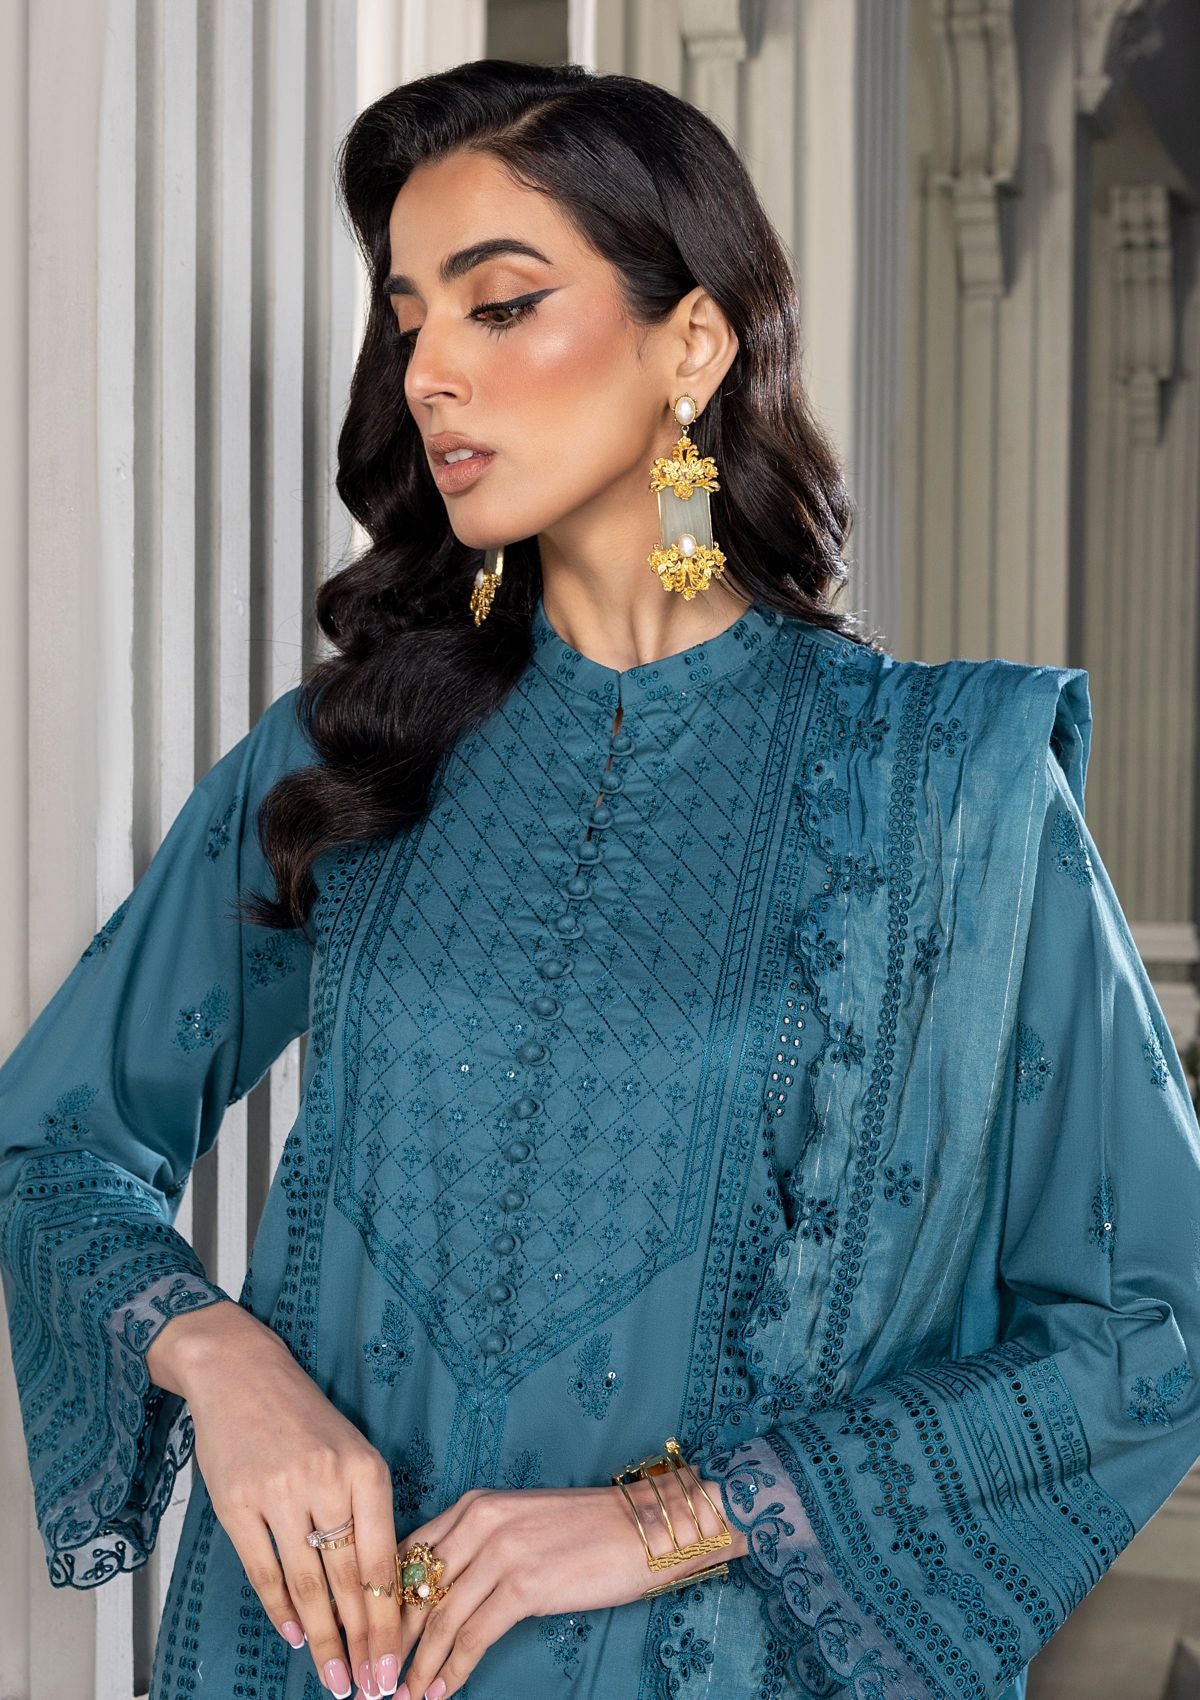 Lawn Collection  - Lakhany - Embroidered - Eid Edition - LG-SR-0170